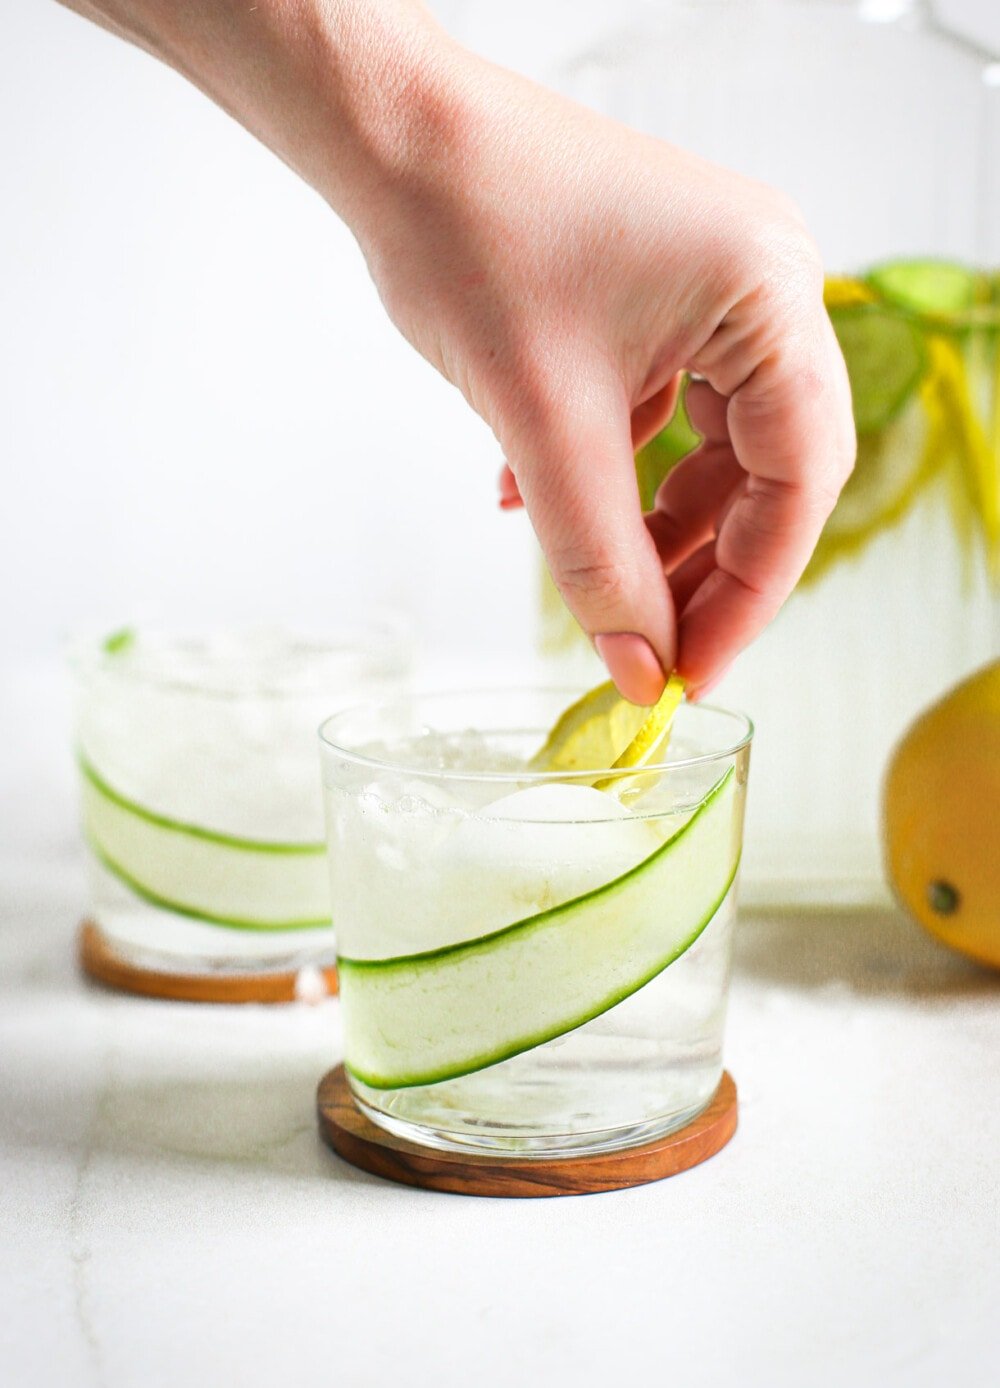 place lemon slice in a glass of cucumber water, clear glass.